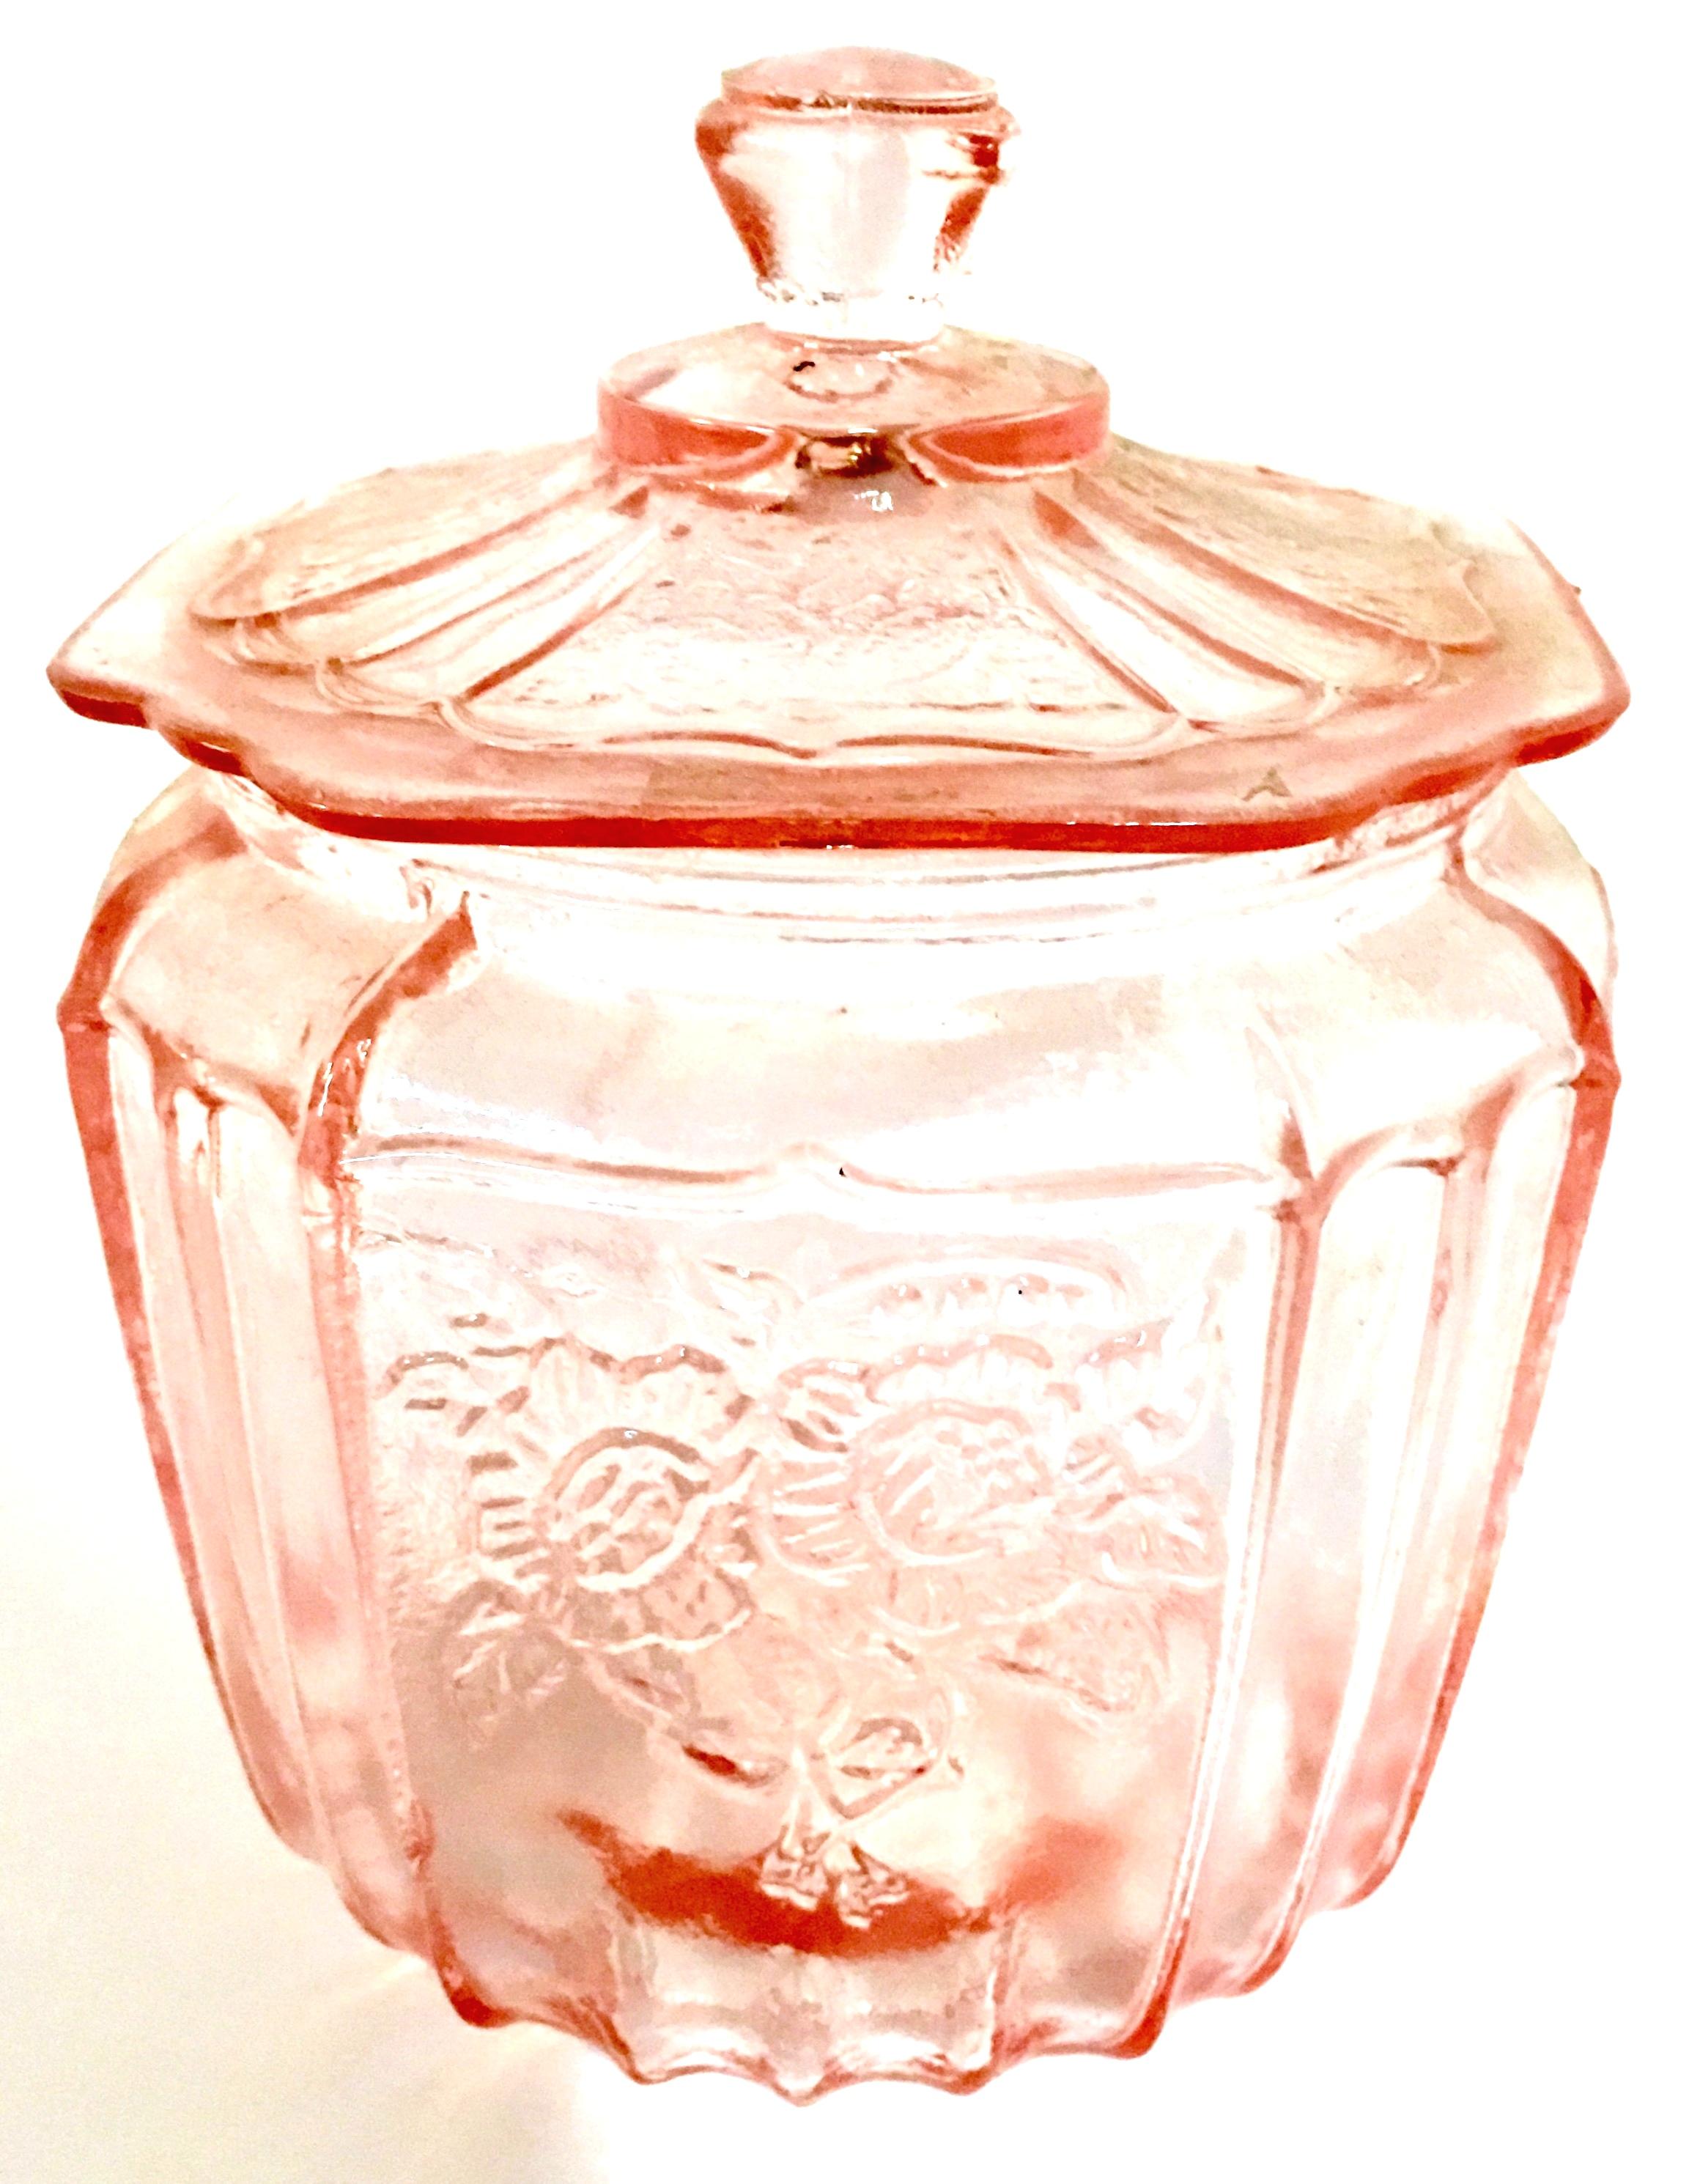 Mid-20th century American pink depression glass lidded cookie jar. Features a raised rose floral pattern.